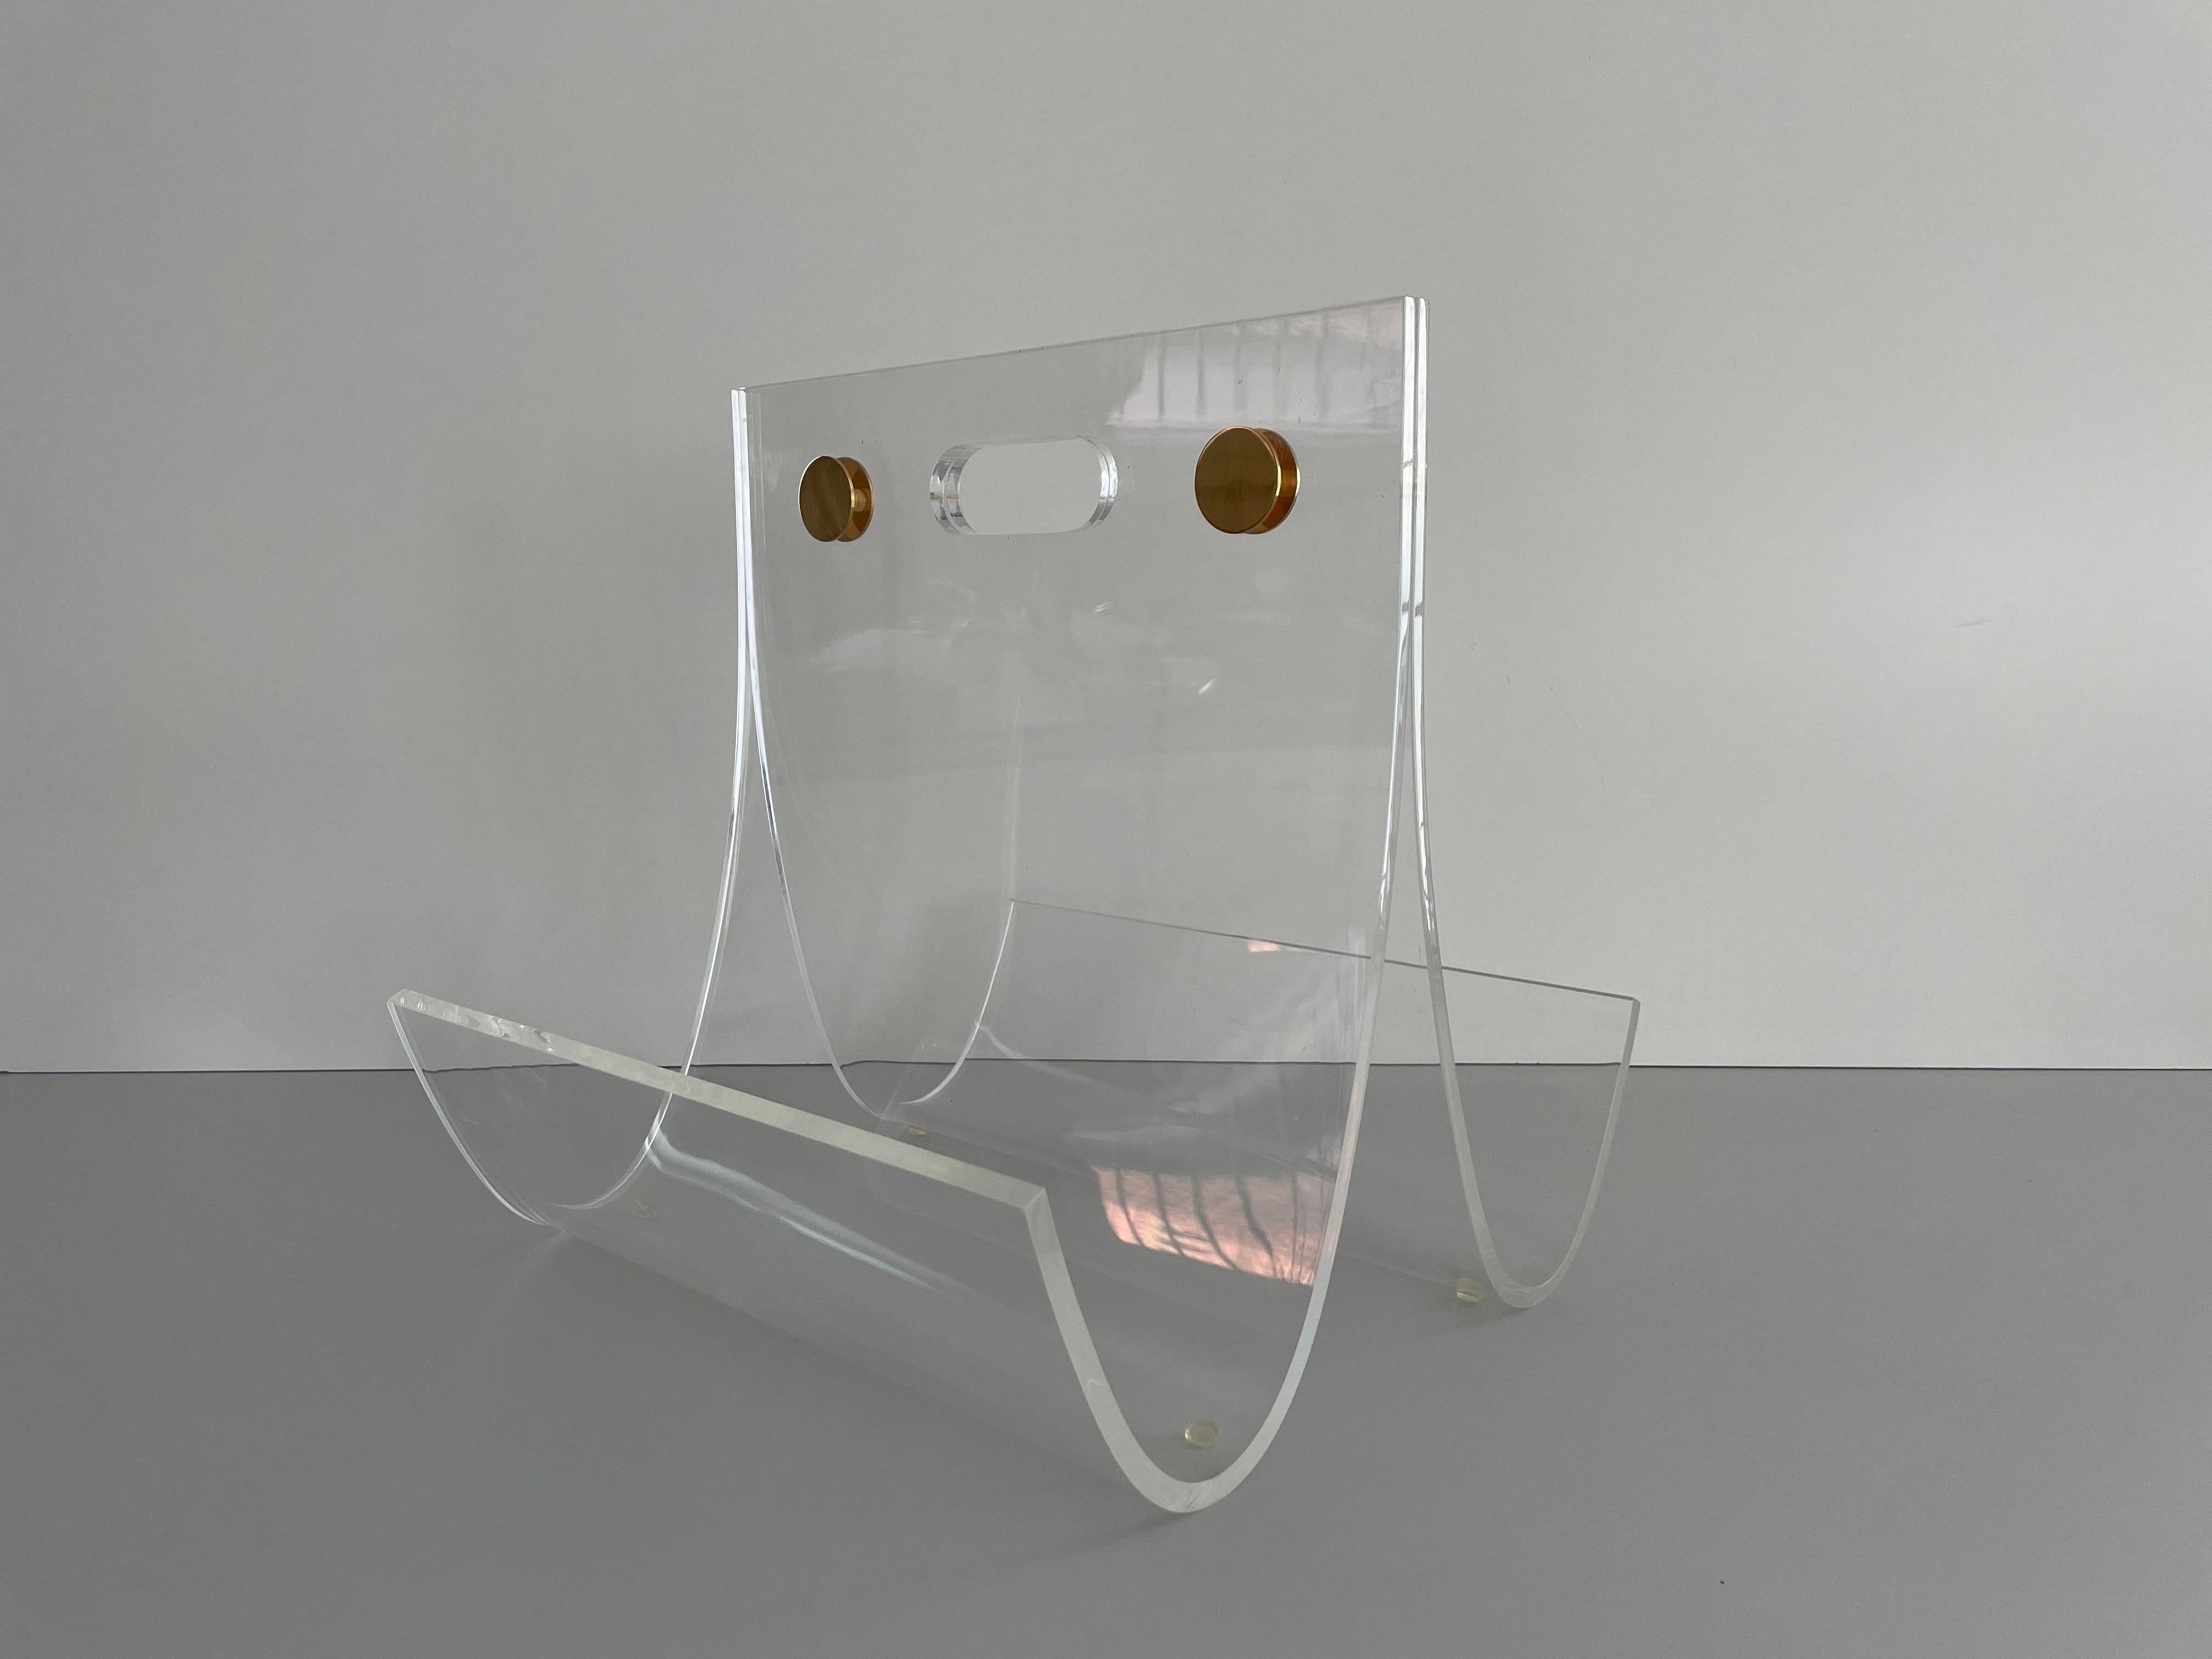 Elegant Heavy Thick Lucite Plexiglass Magazine Rack, 1970s, Germany

It is very ideal and suitable for all living areas.

No damage, no crack.
Wear consistent with age and use.

Measurements: 
Height: 41 cm
Width: 39 cm
Depth: 40 cm